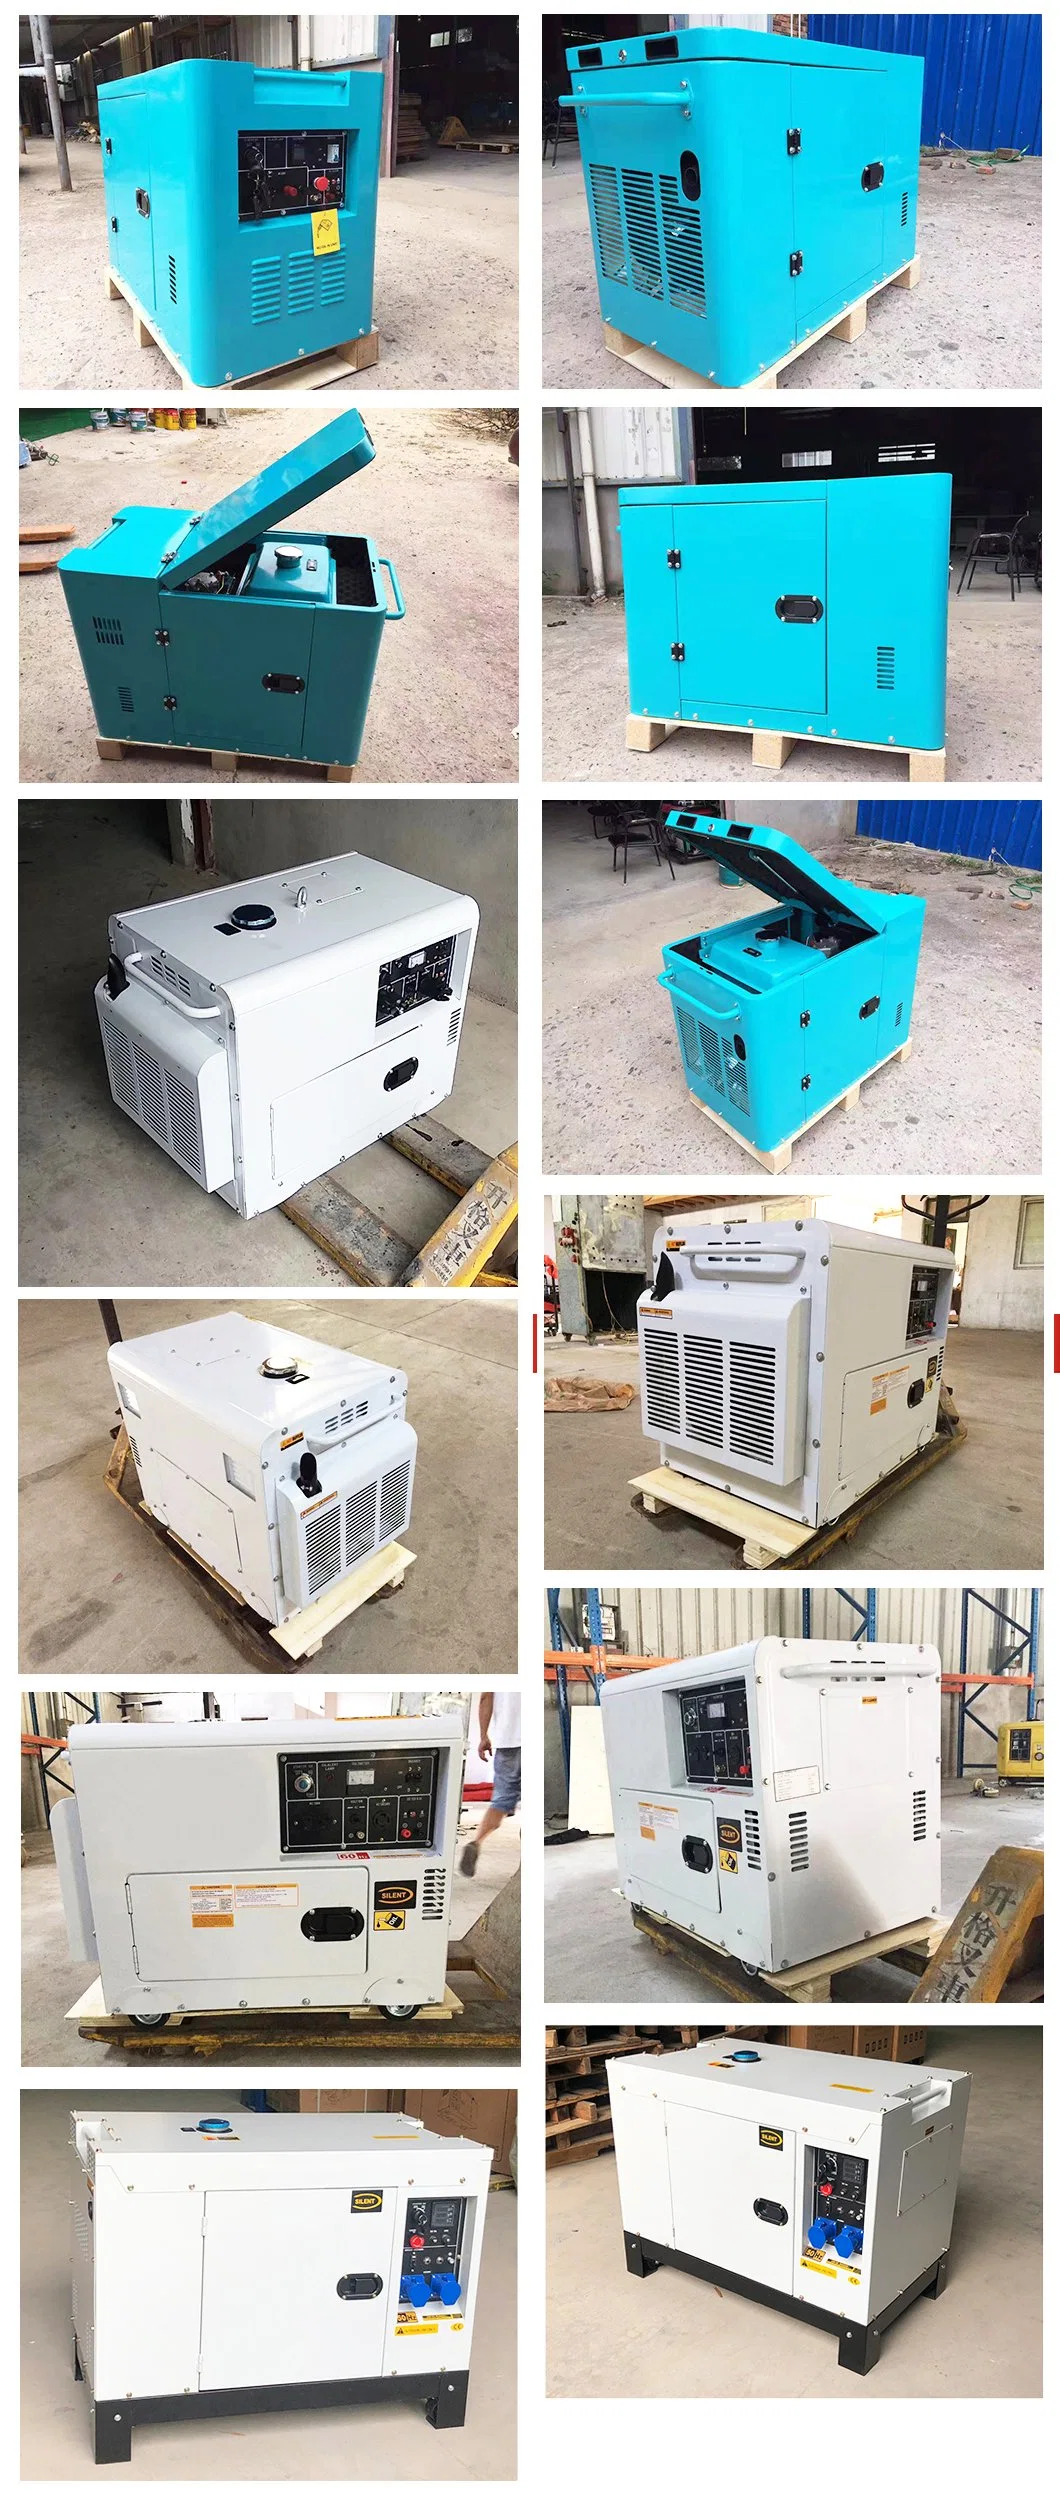 Hot Sale! Diesel Generator Portable 5kVA 5kw 5.5 Kw 5.5kw Engine F188 Portable Small Size Diesel Wind Natural Gas Tower Lights Inverter Genset Price